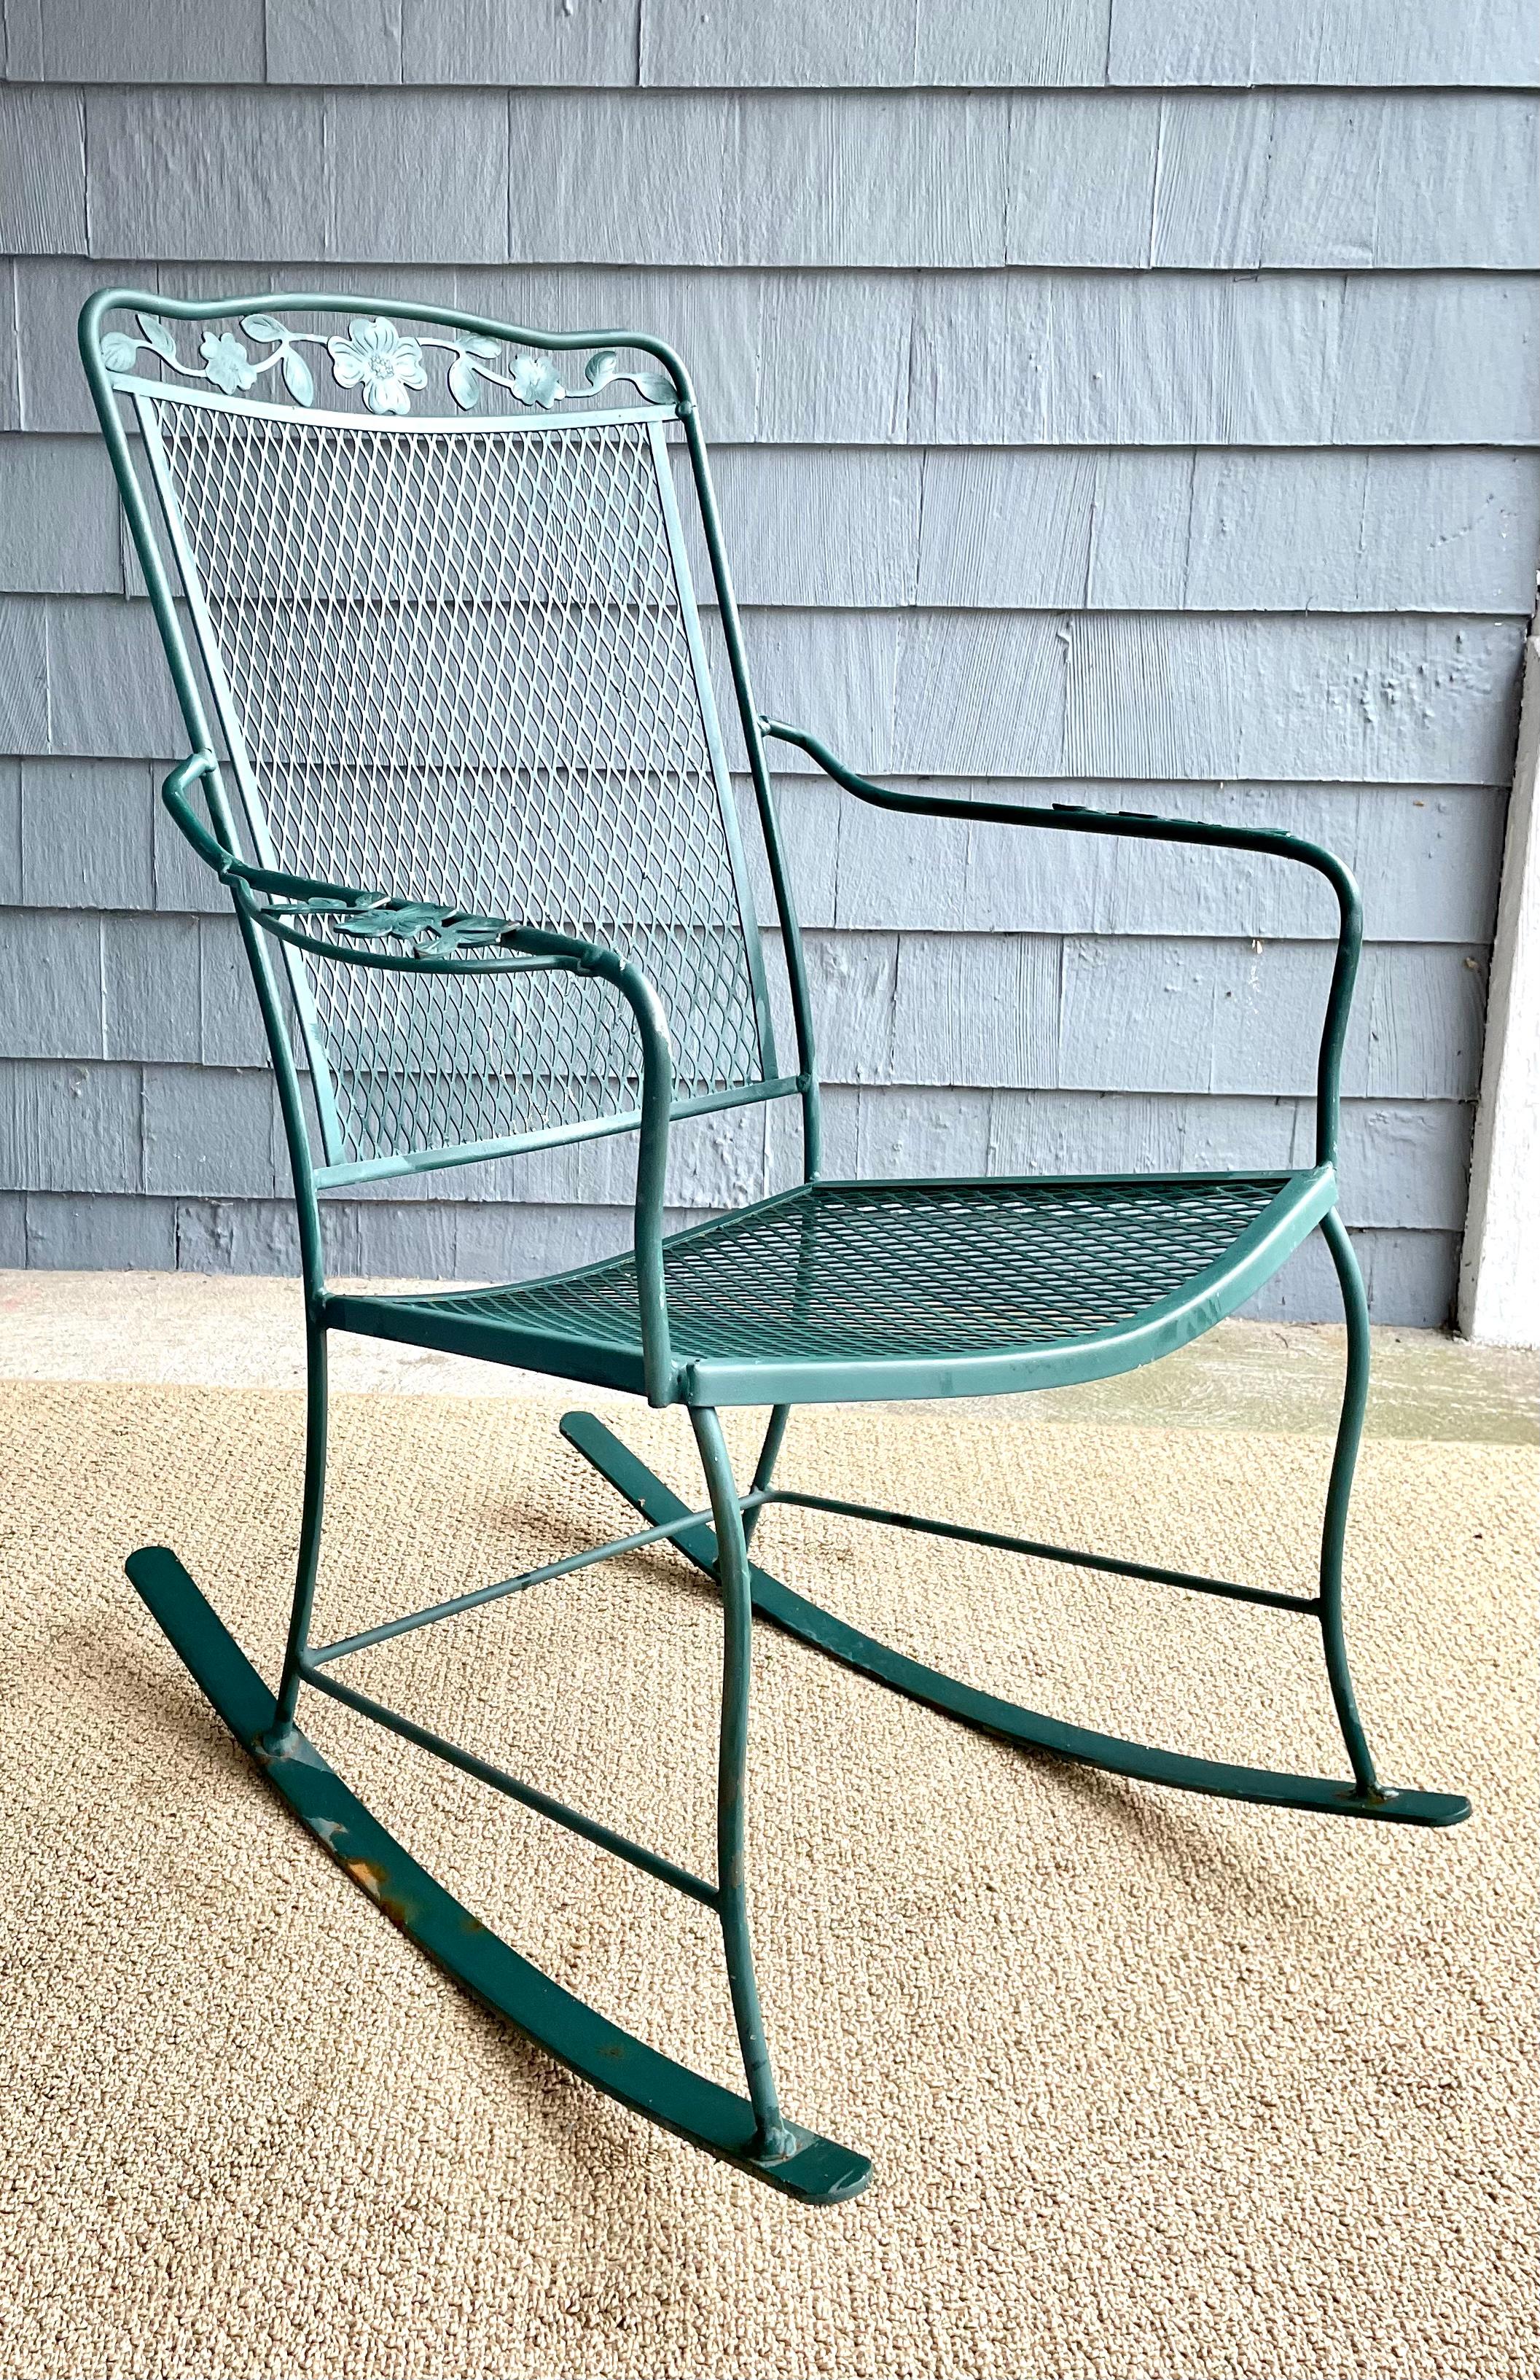 Vintage Wrought Iron Outdoor Patio Chairs Set of 6 For Sale 11